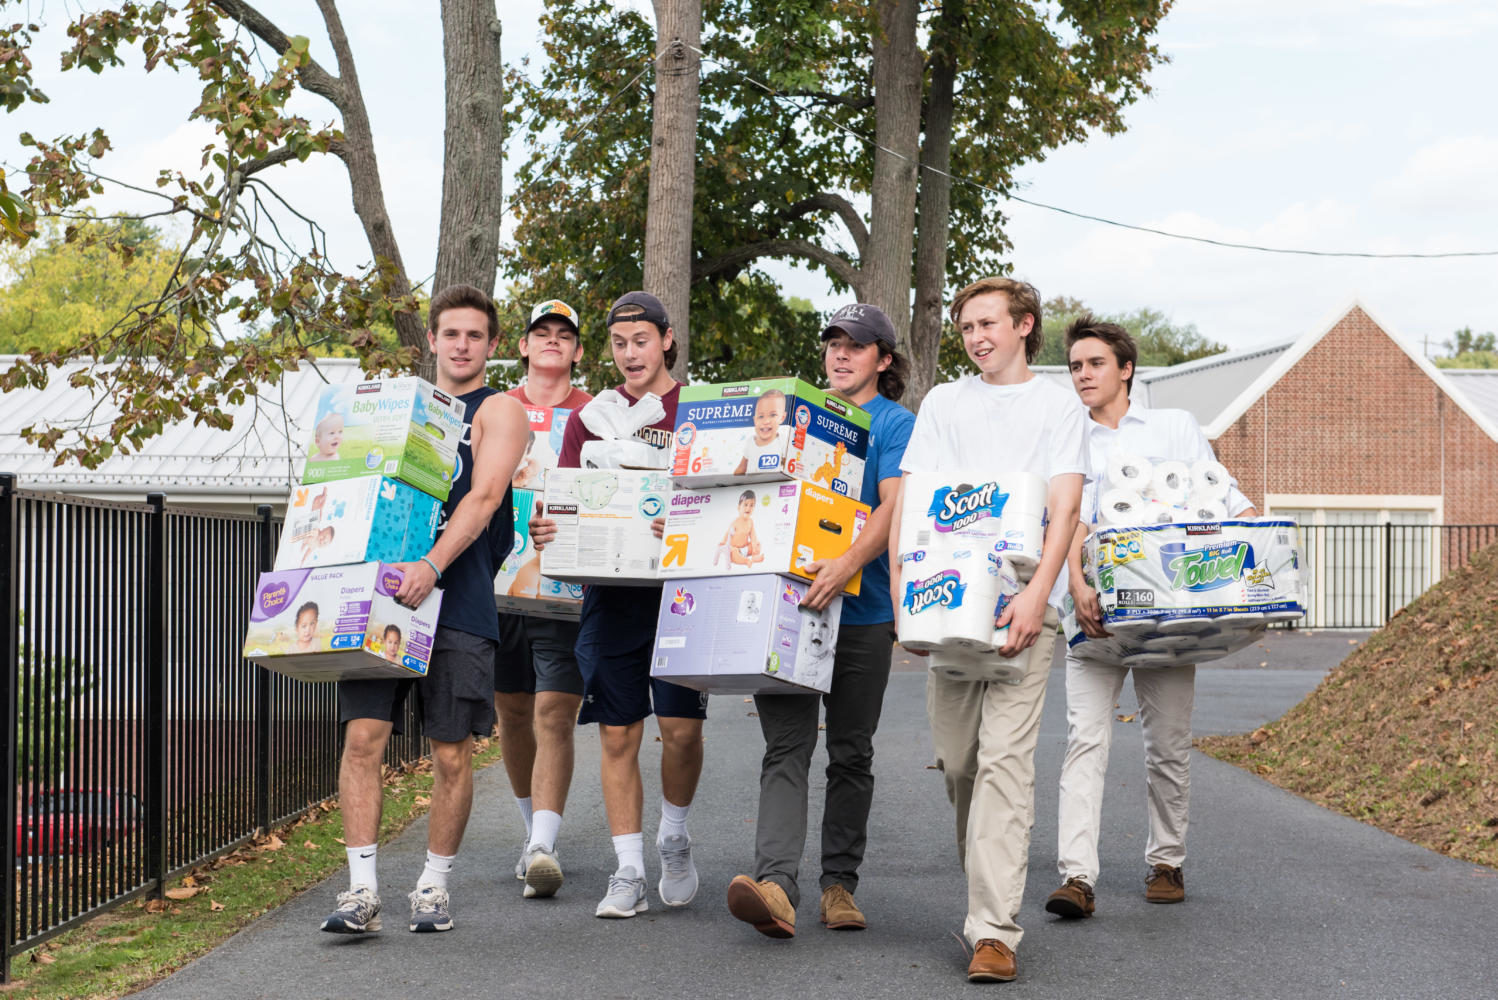 Members of The Hill School community collected donations for the residents of Puerto Rico who are trying to recover from the devastating hurricane Maria.  Members of the hockey team loaded the donations into a bus so the items could be transported to an Allentown warehouse where they were organized for shipping. Photo courtesy of Sandi Yanisko.